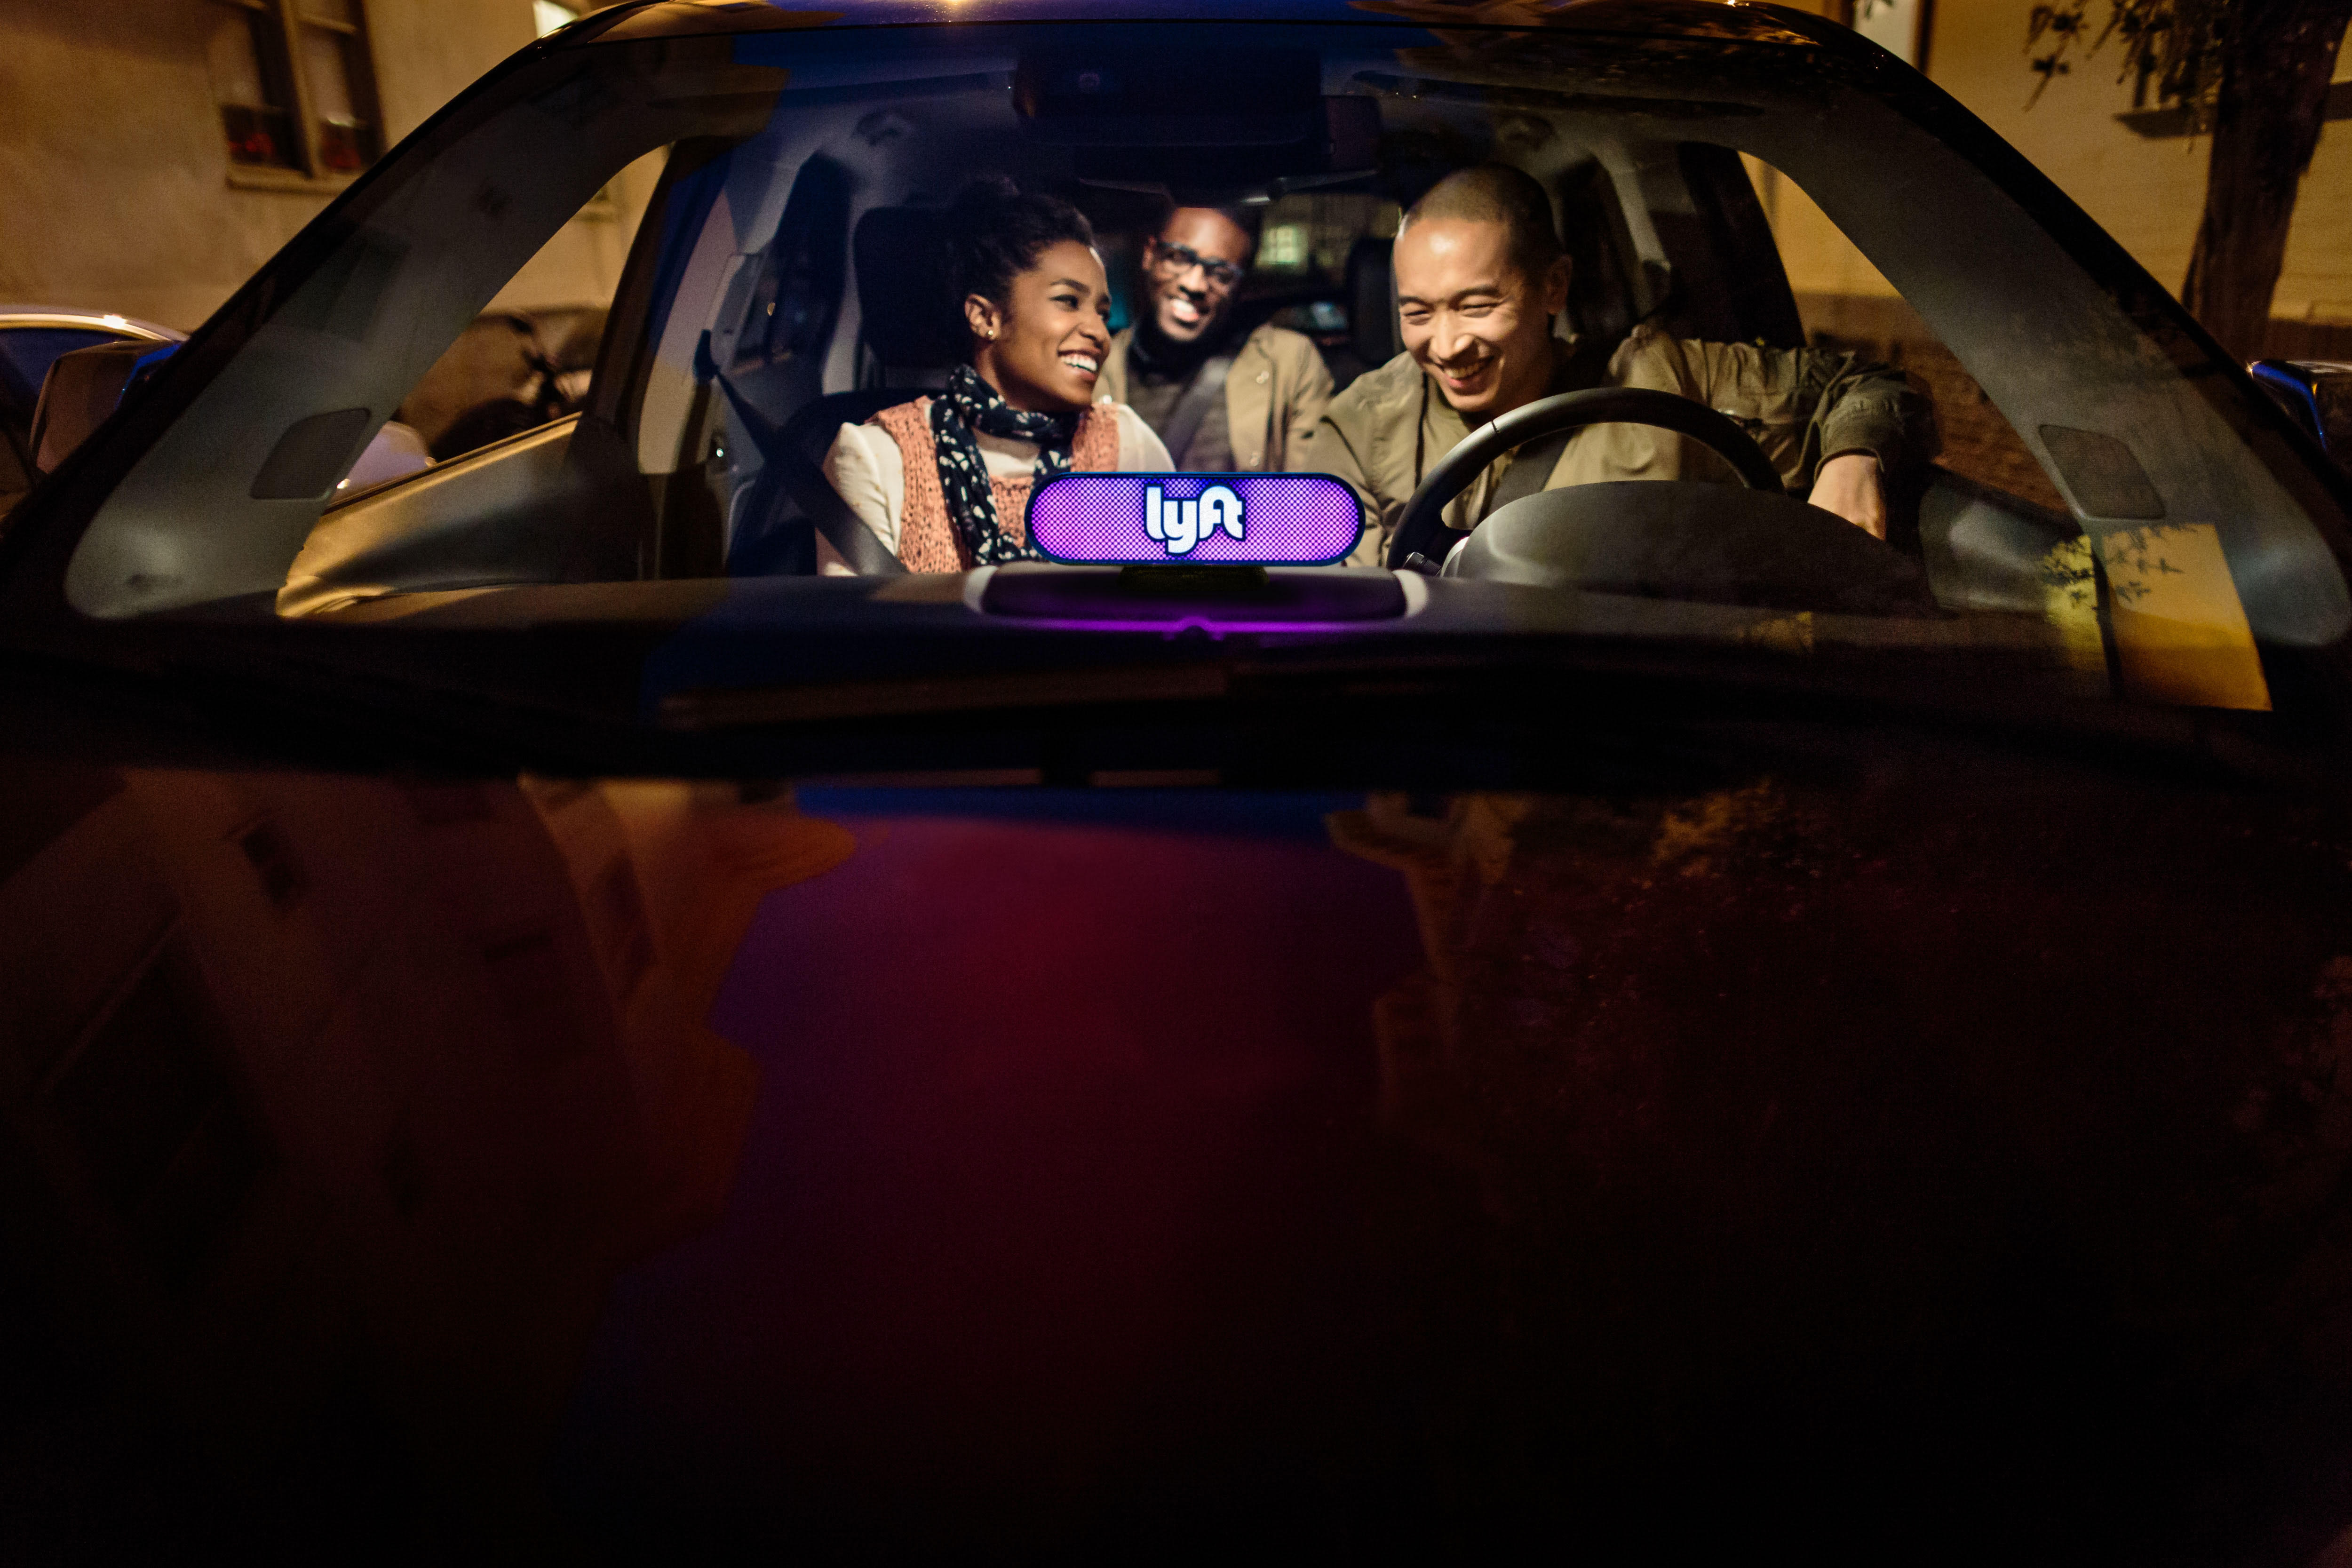 Three people riding in a lyft